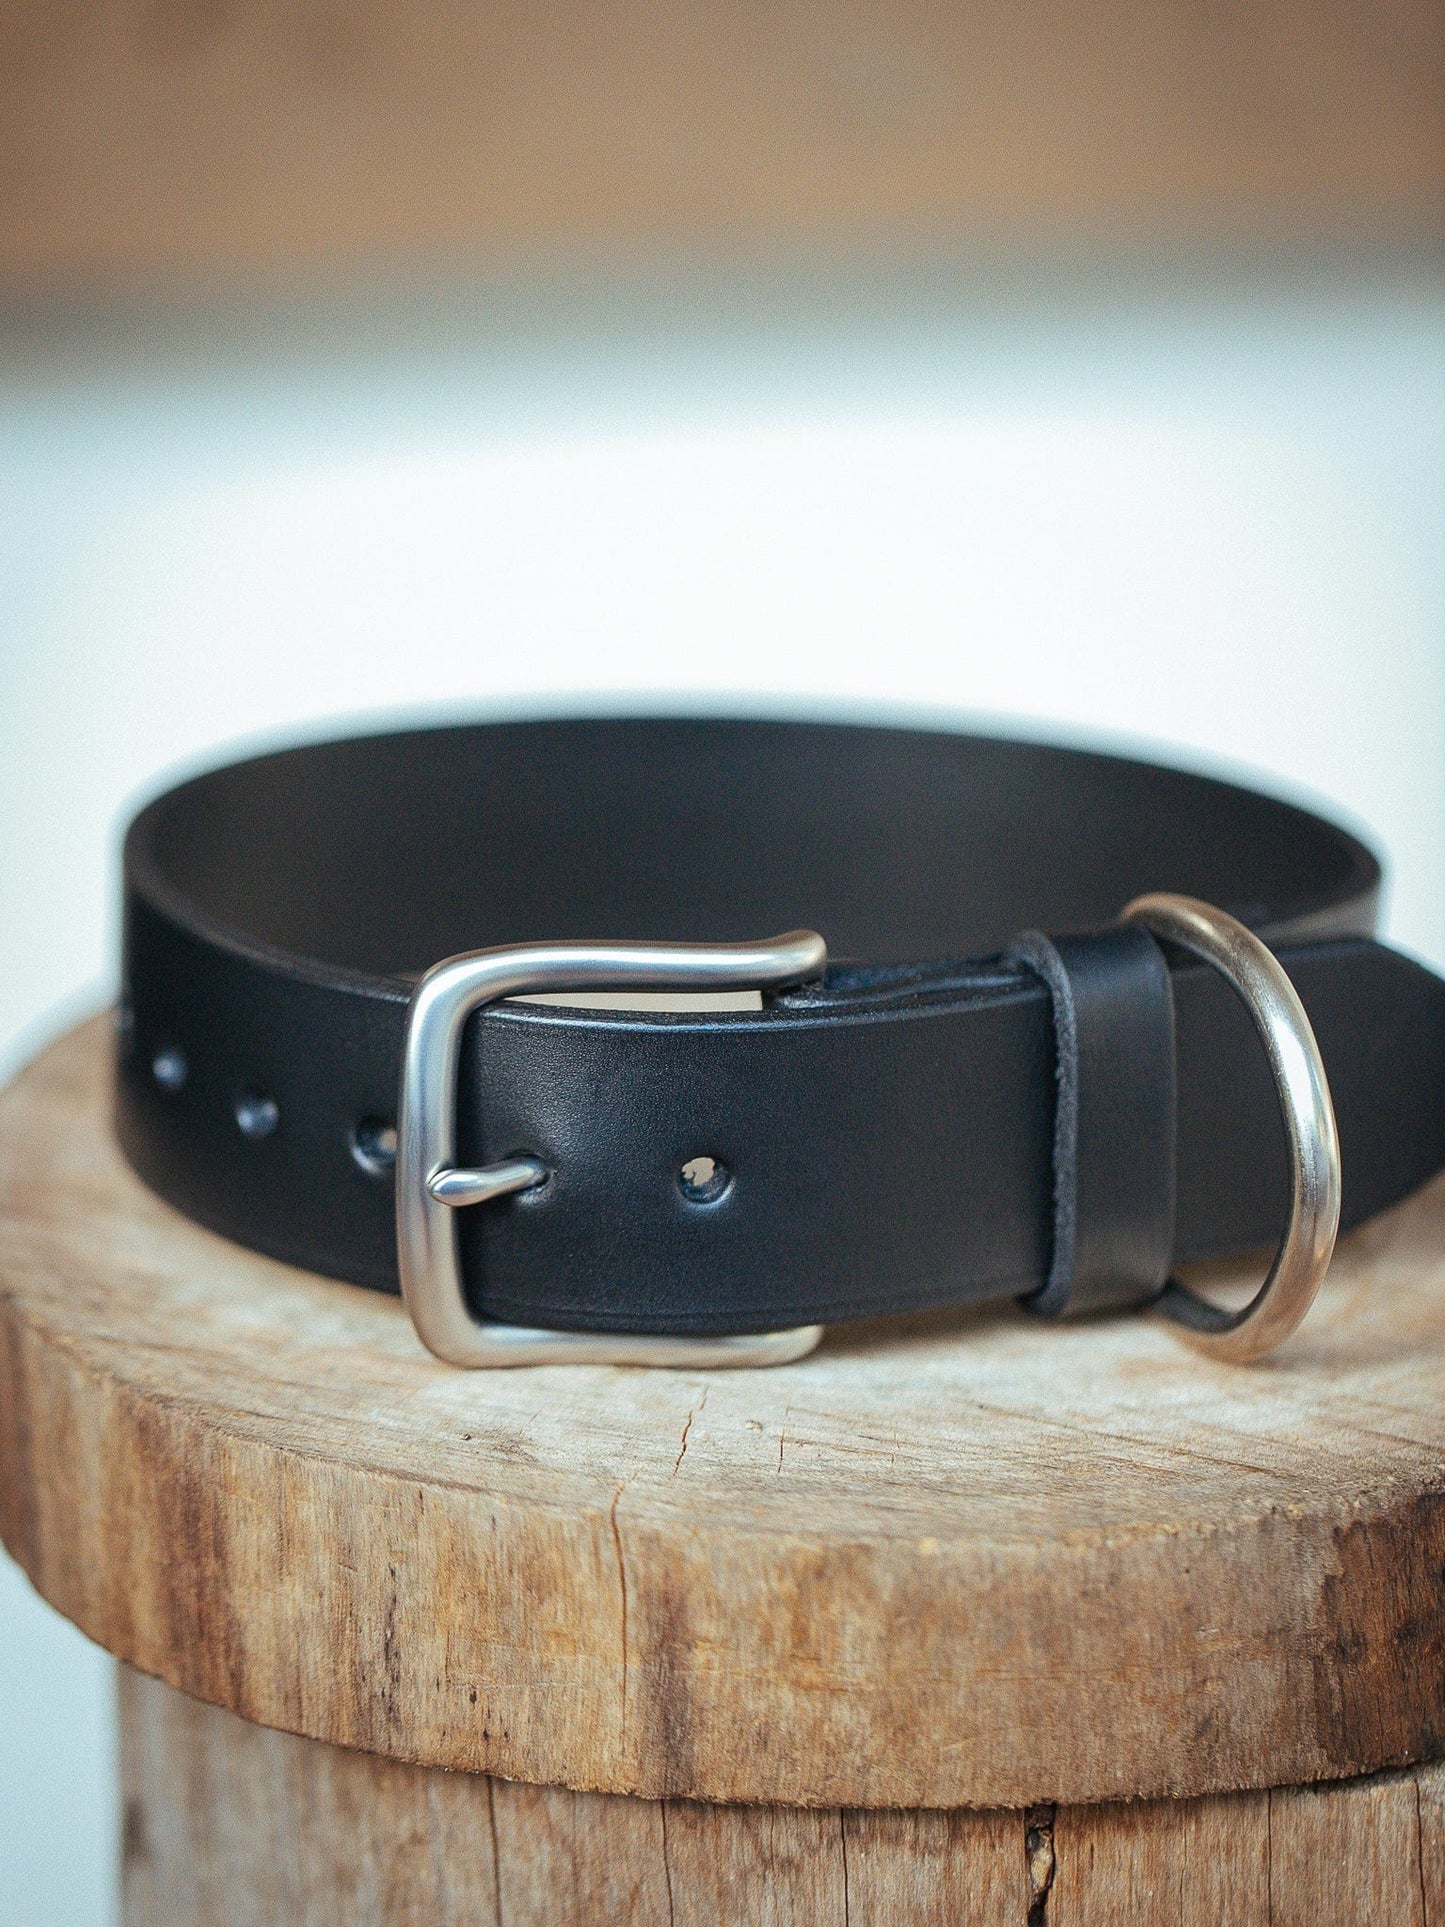 The Real McCaul Leathergoods Small (30-39cm) / Silver Personalised Dog Collar 38mm Wide - Black Australian Made Australian Owned Leather Dog Collar with Brass Fittings- Australian Made